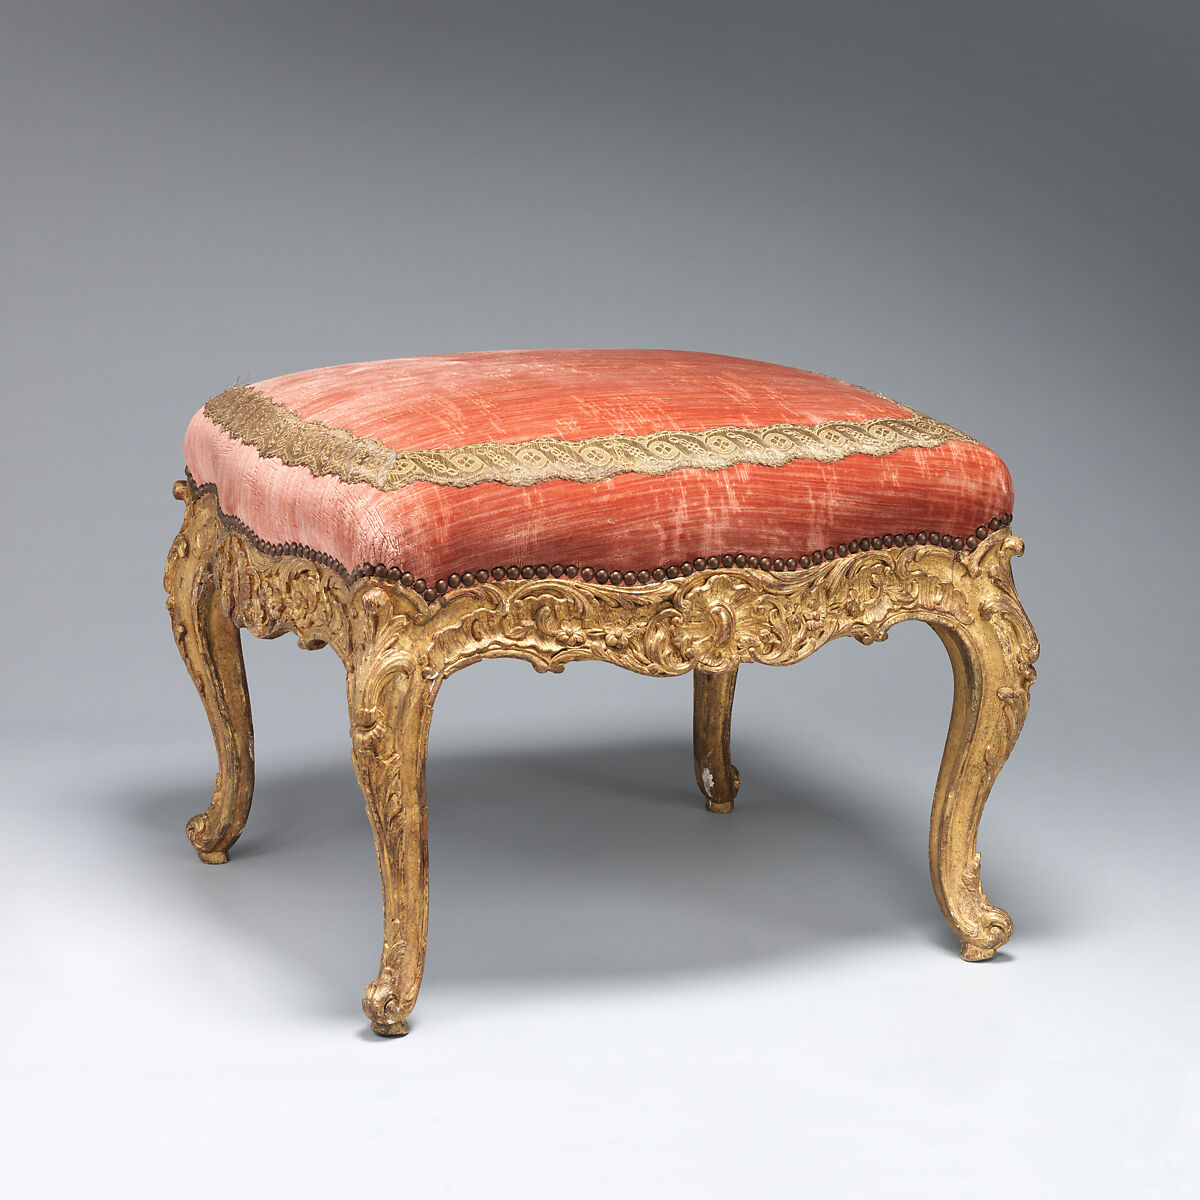 Stool (tabouret) (one of a pair), Possibly by Jean-Baptiste I Tilliard (French, 1686–1766), Beechwood frame, carved and gilded, upholstered in modern velvet, French, Paris 